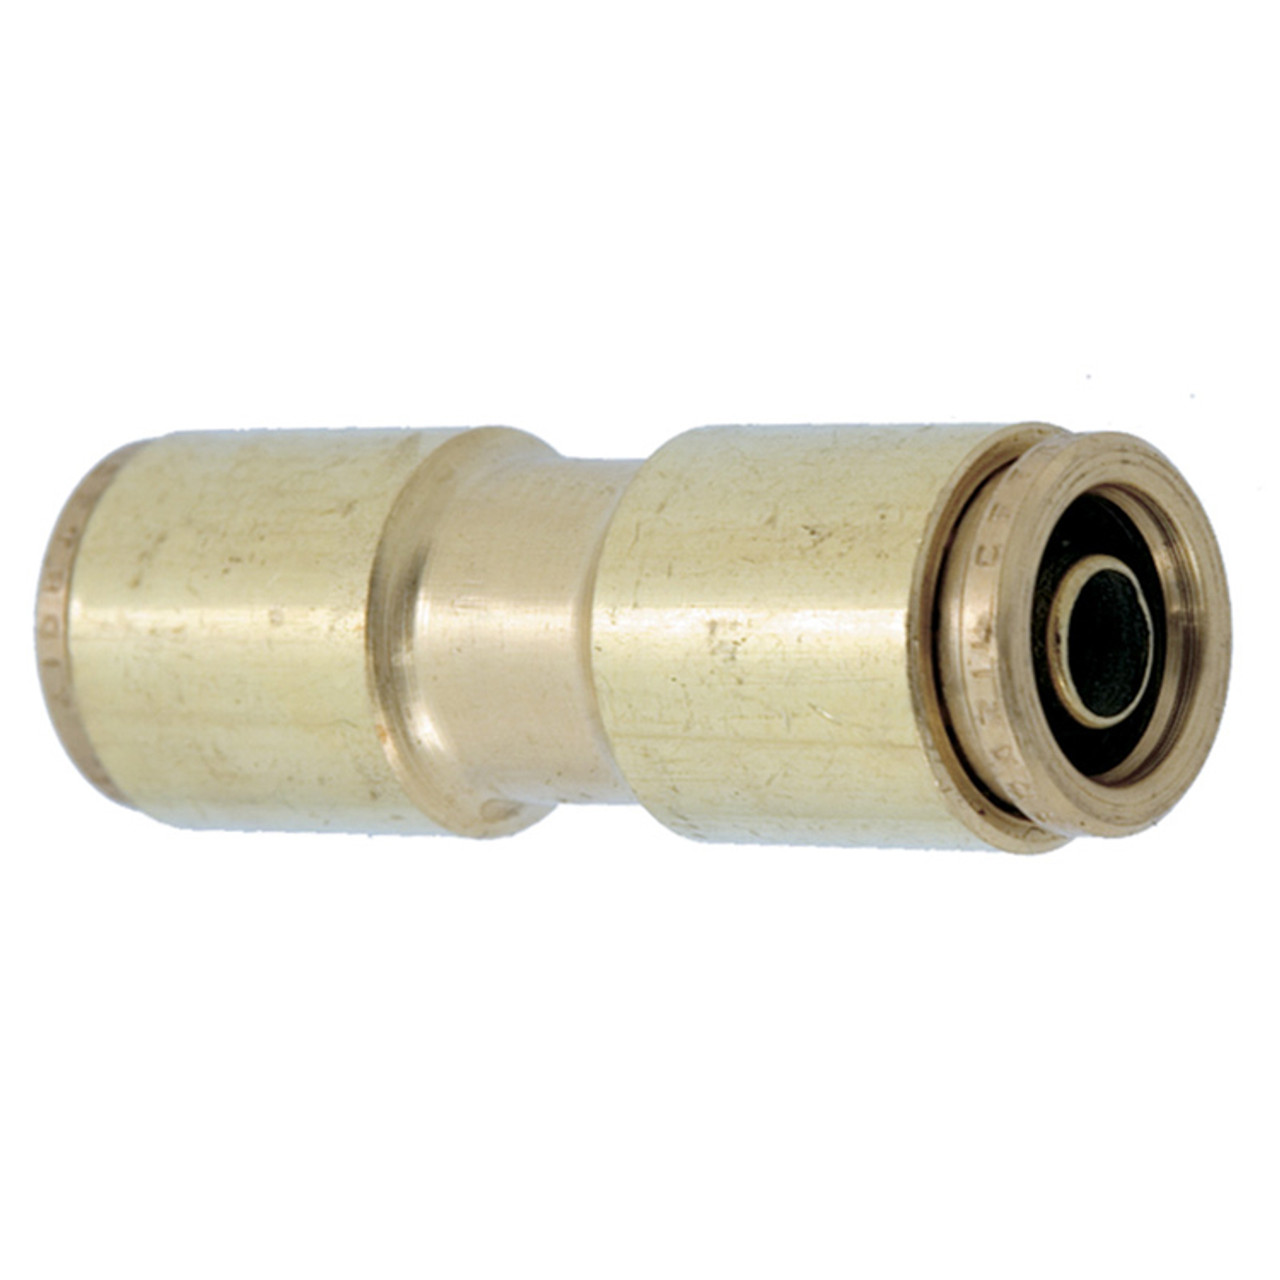 3/8" Brass DOT Push-To-Connect Union   G7070P-06-06